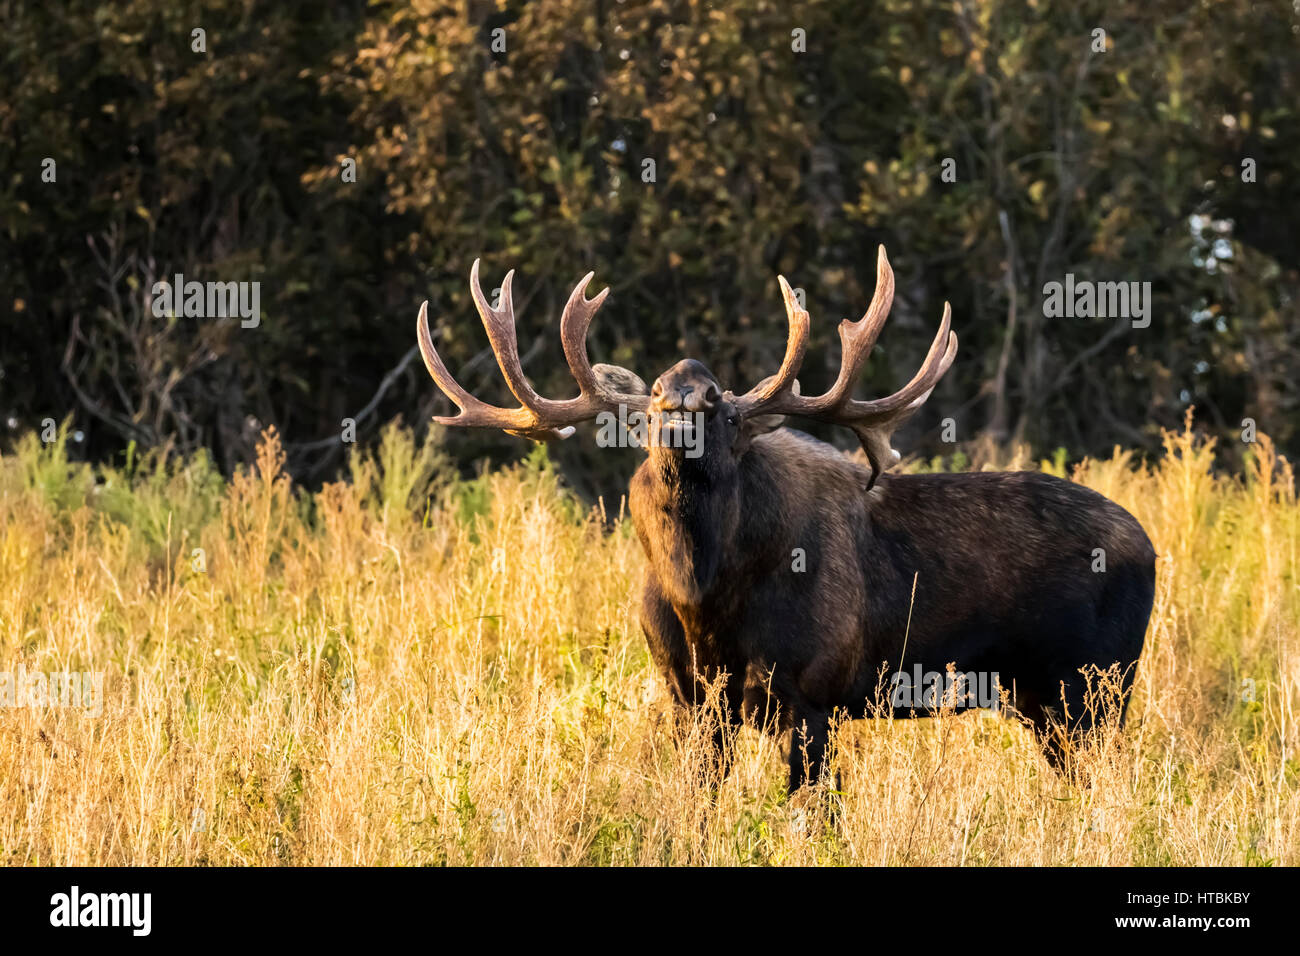 Bull moose (alces alces) doing flehman response to check cow's scent during the rut season in autumn, South-central Alaska Stock Photo